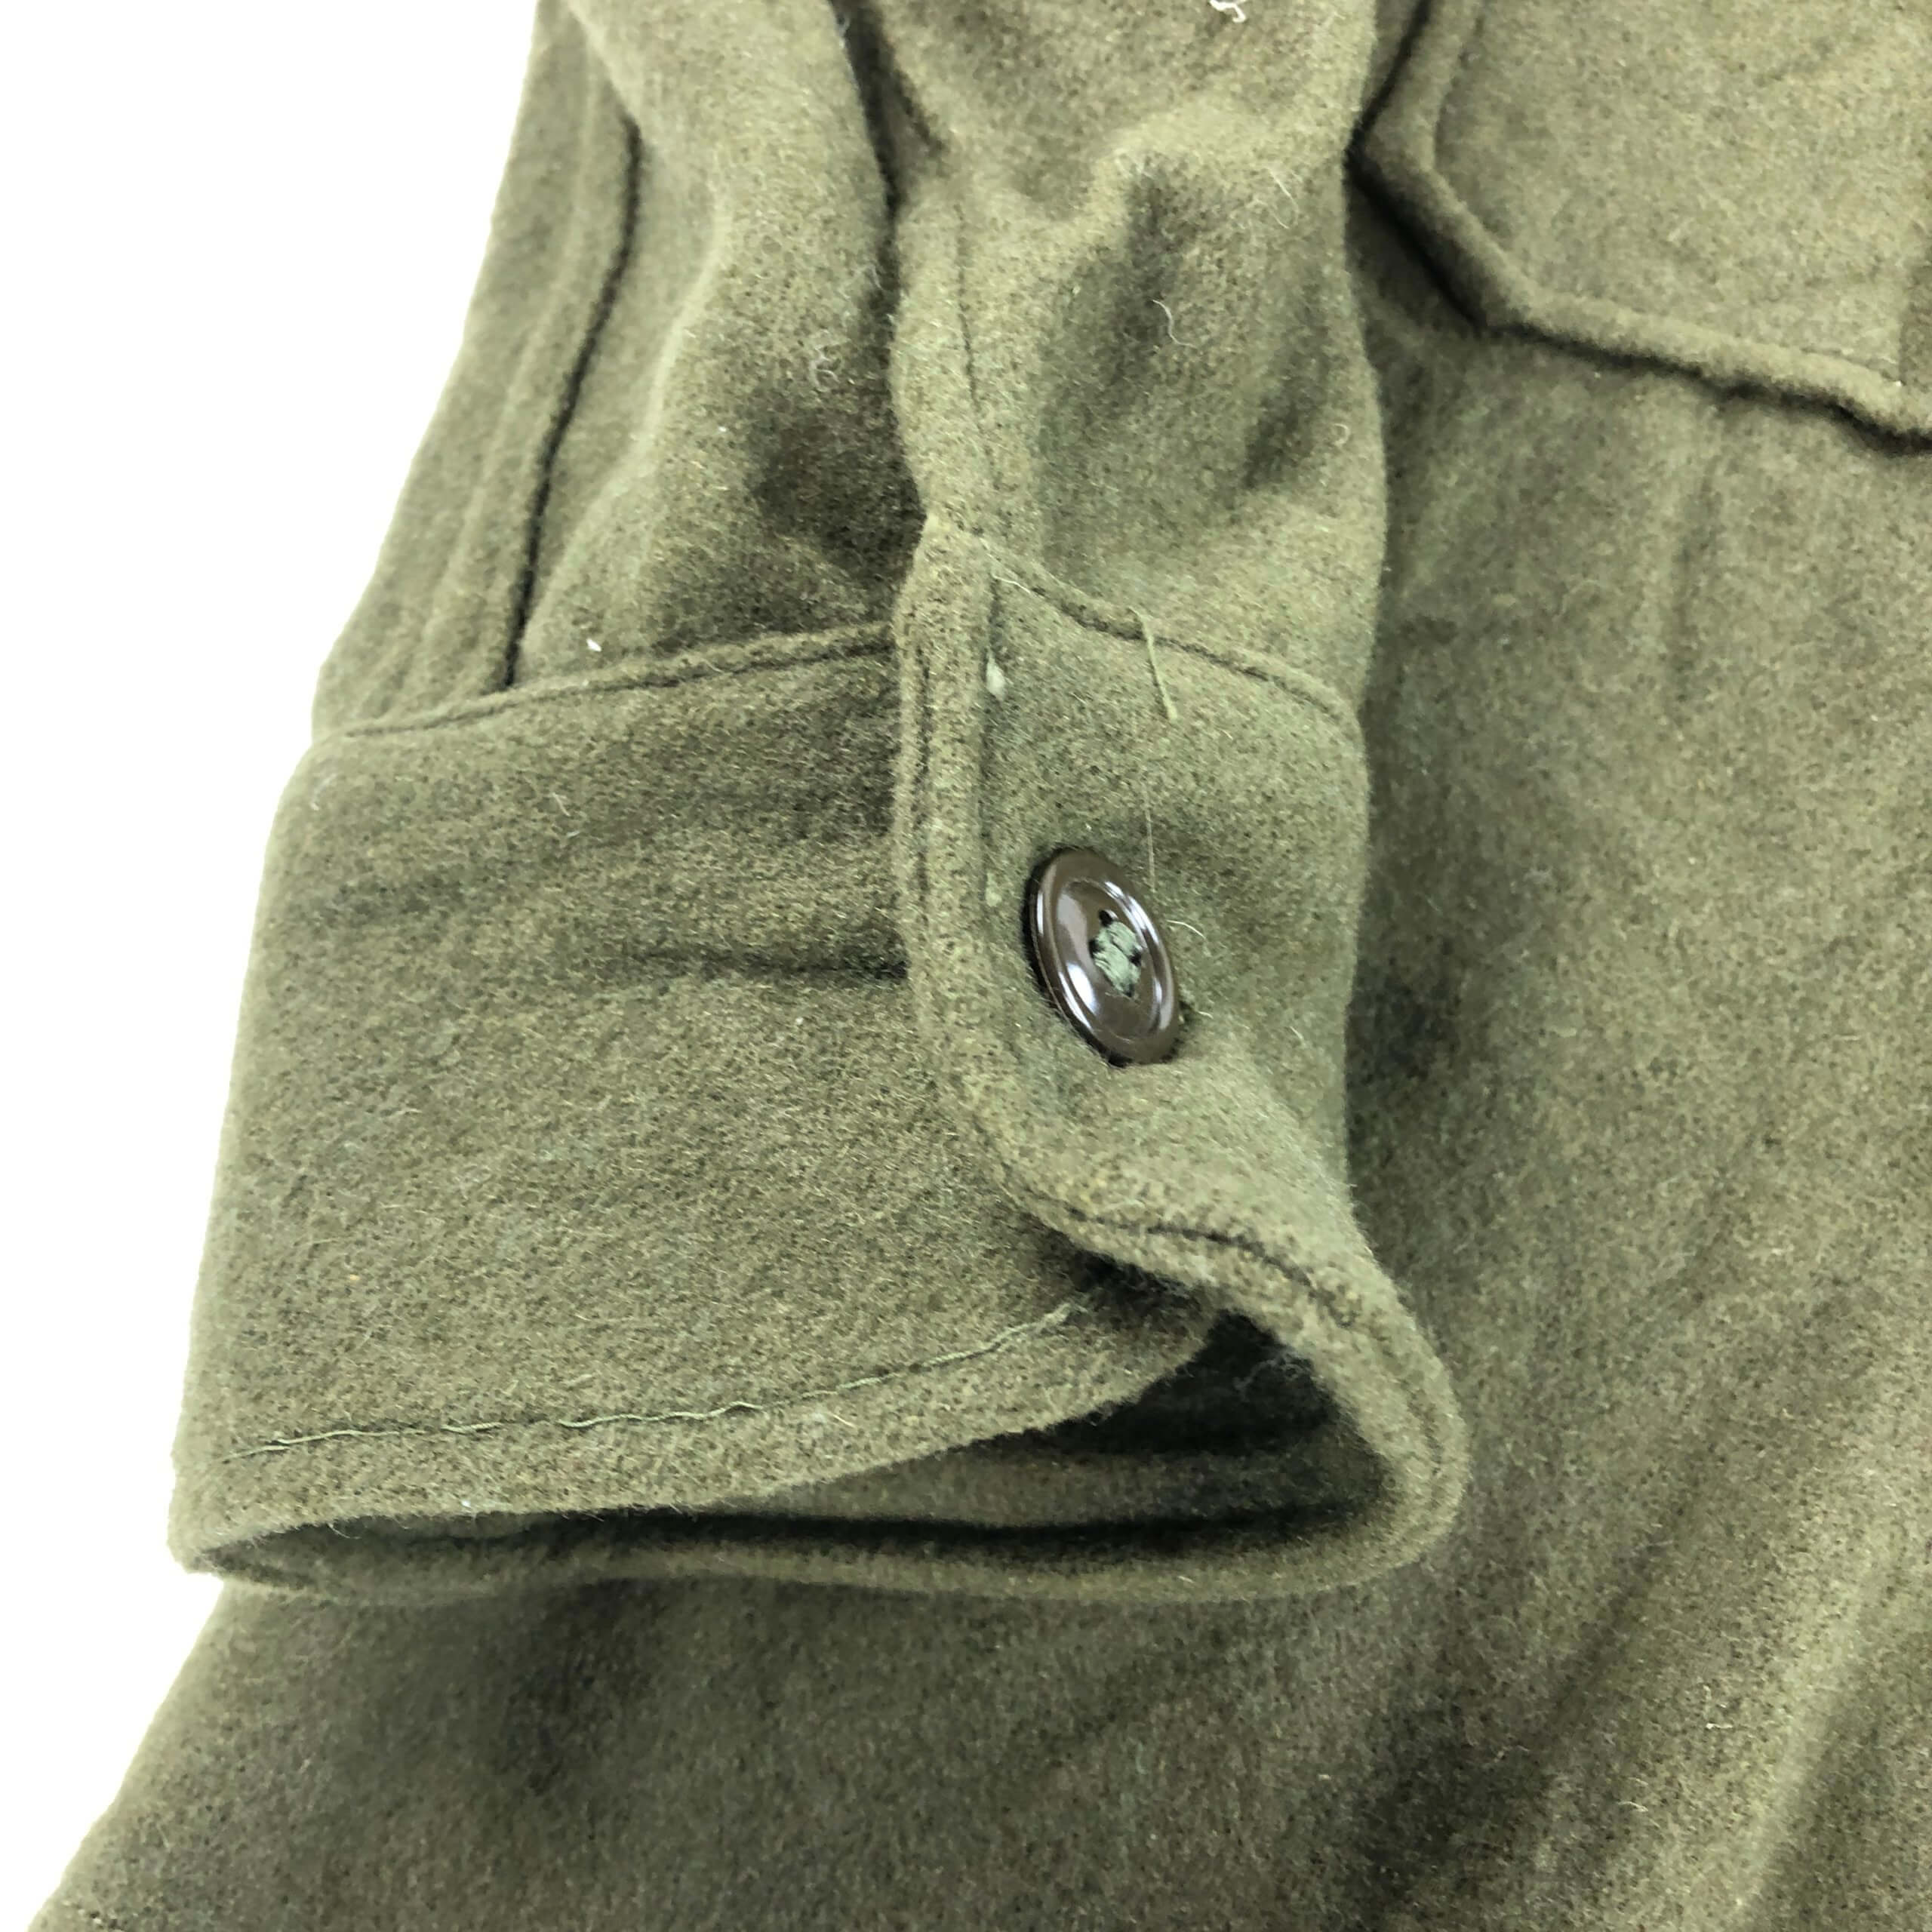 New NOS US Military Army Wool Field Shirt Cold Weather OG-108 OD Green Small